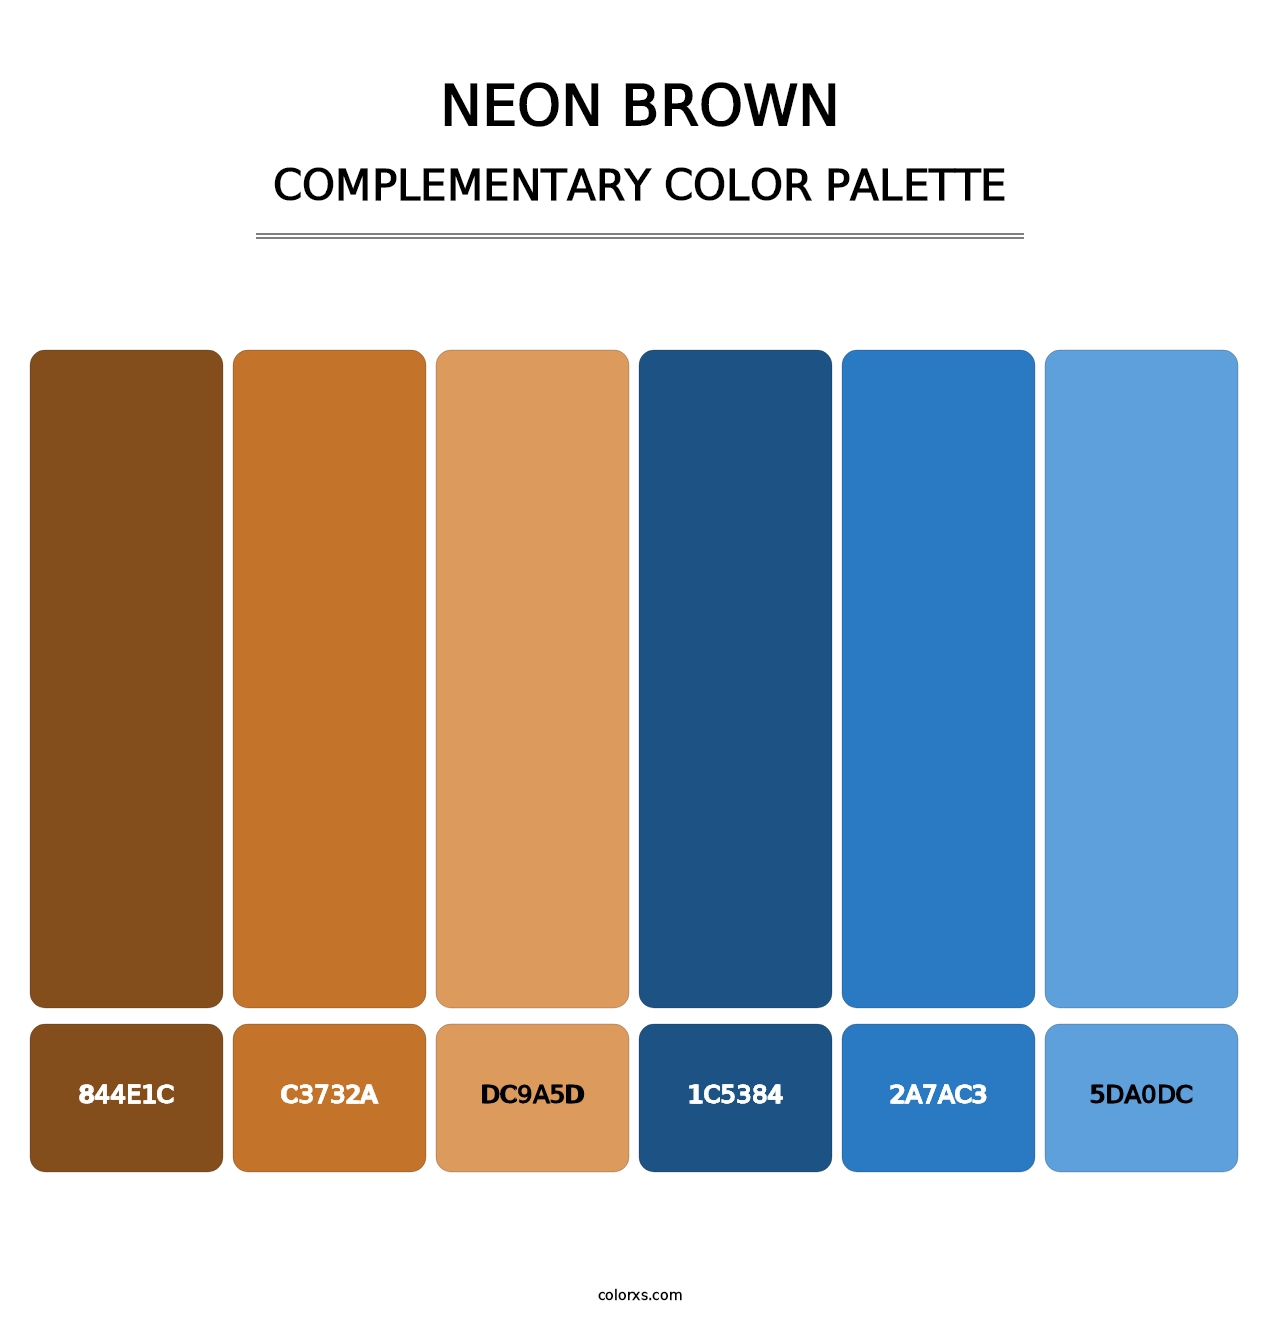 Neon Brown - Complementary Color Palette